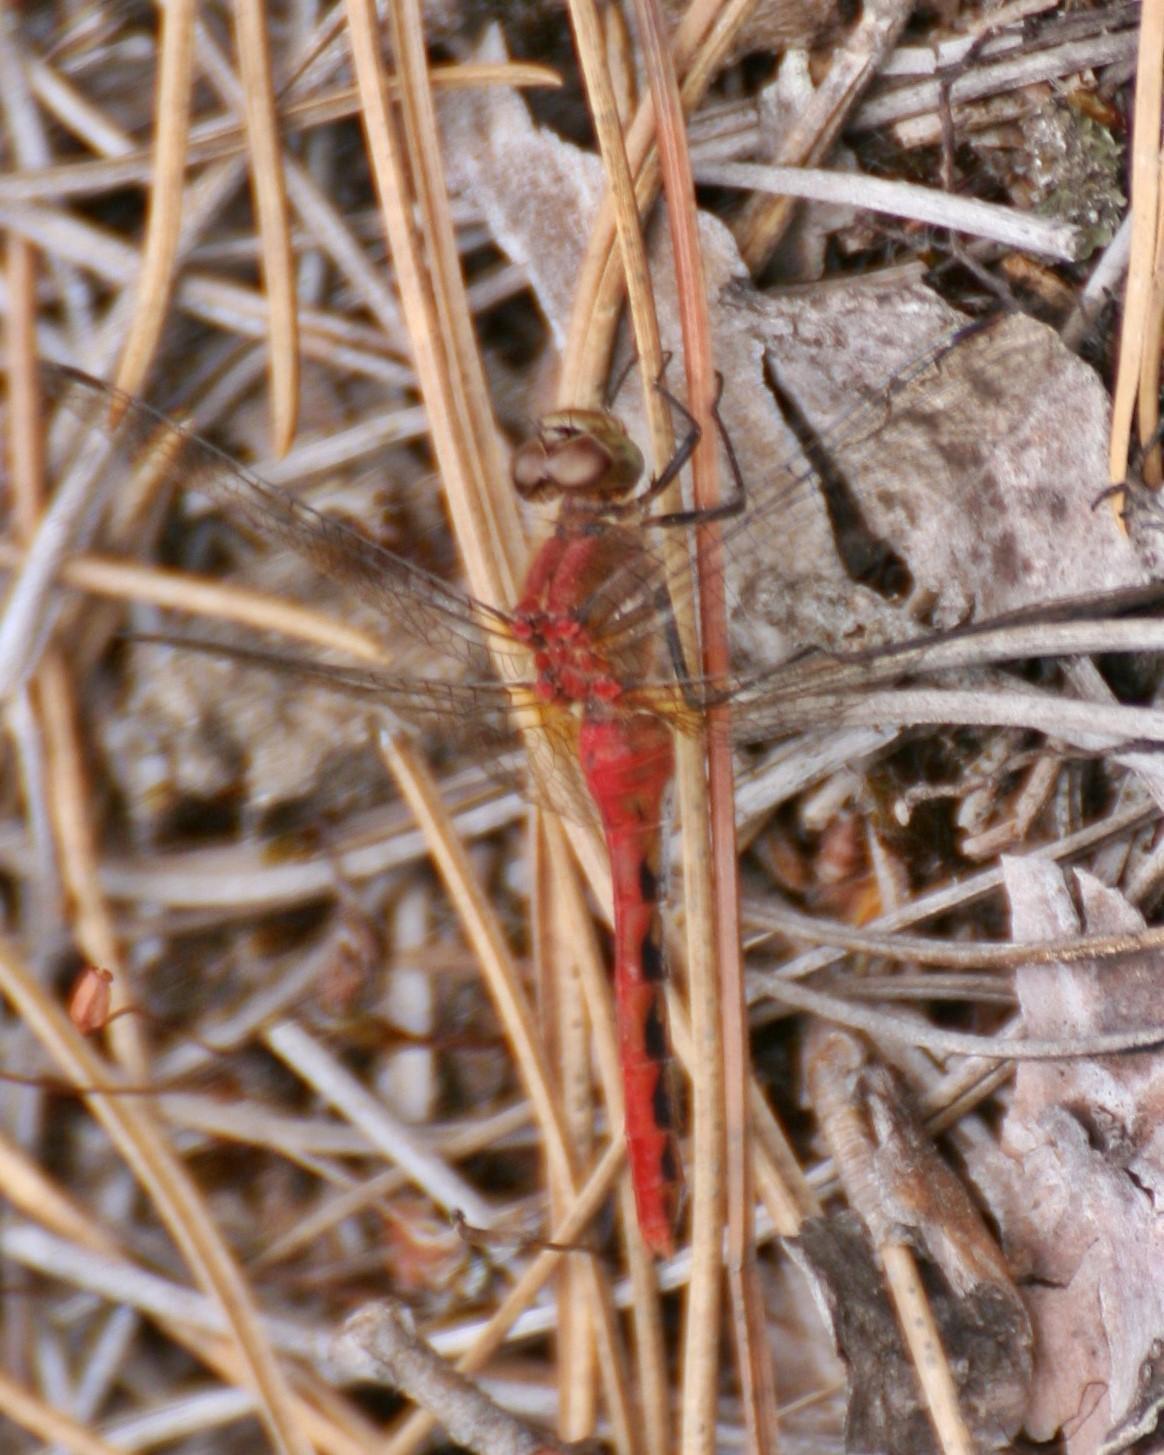 Cherry-faced Meadowhawk Photo by Andrew Theus